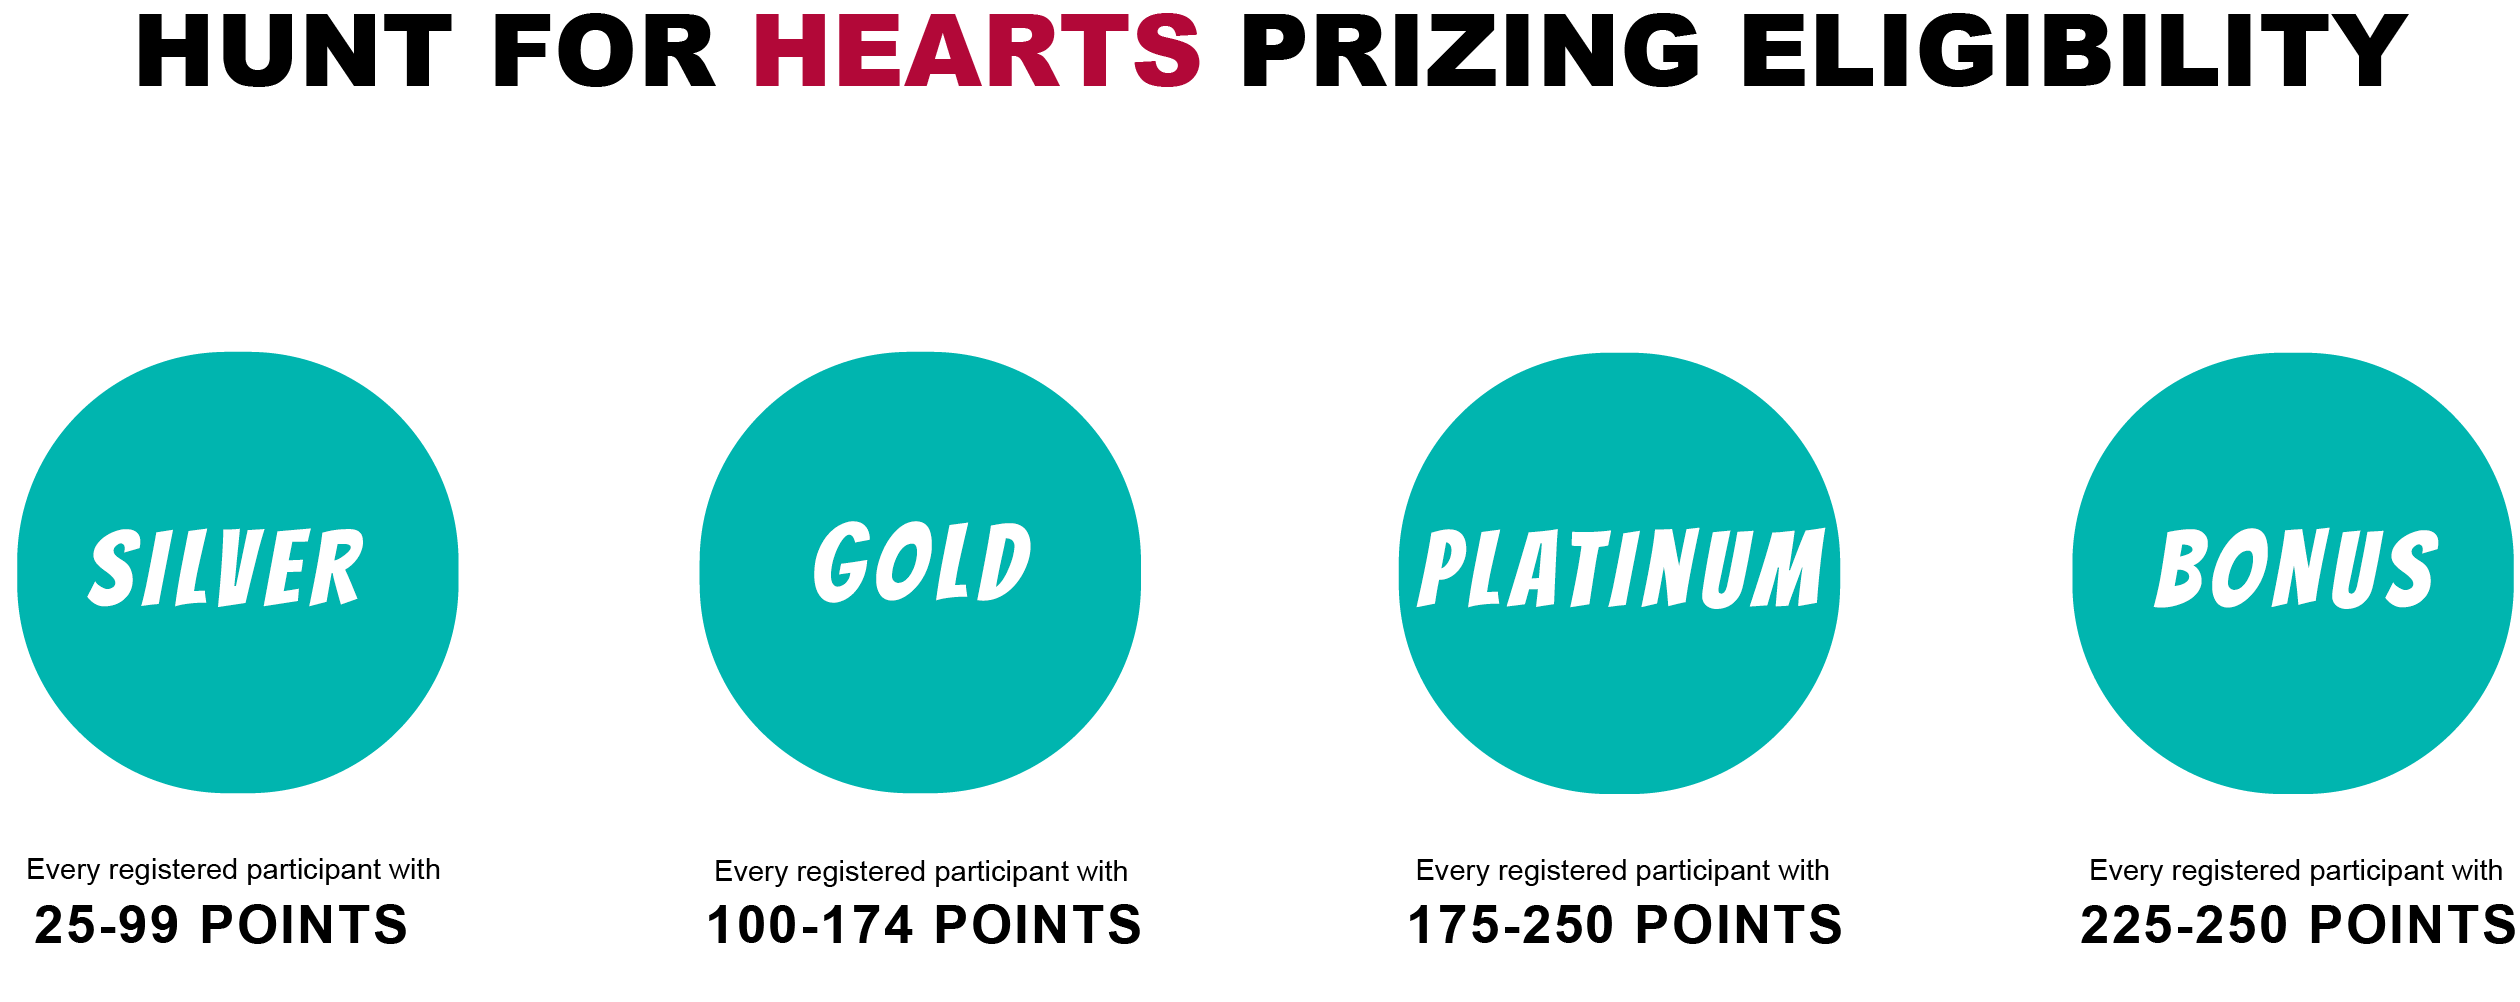 Hunt for Hearts Points System